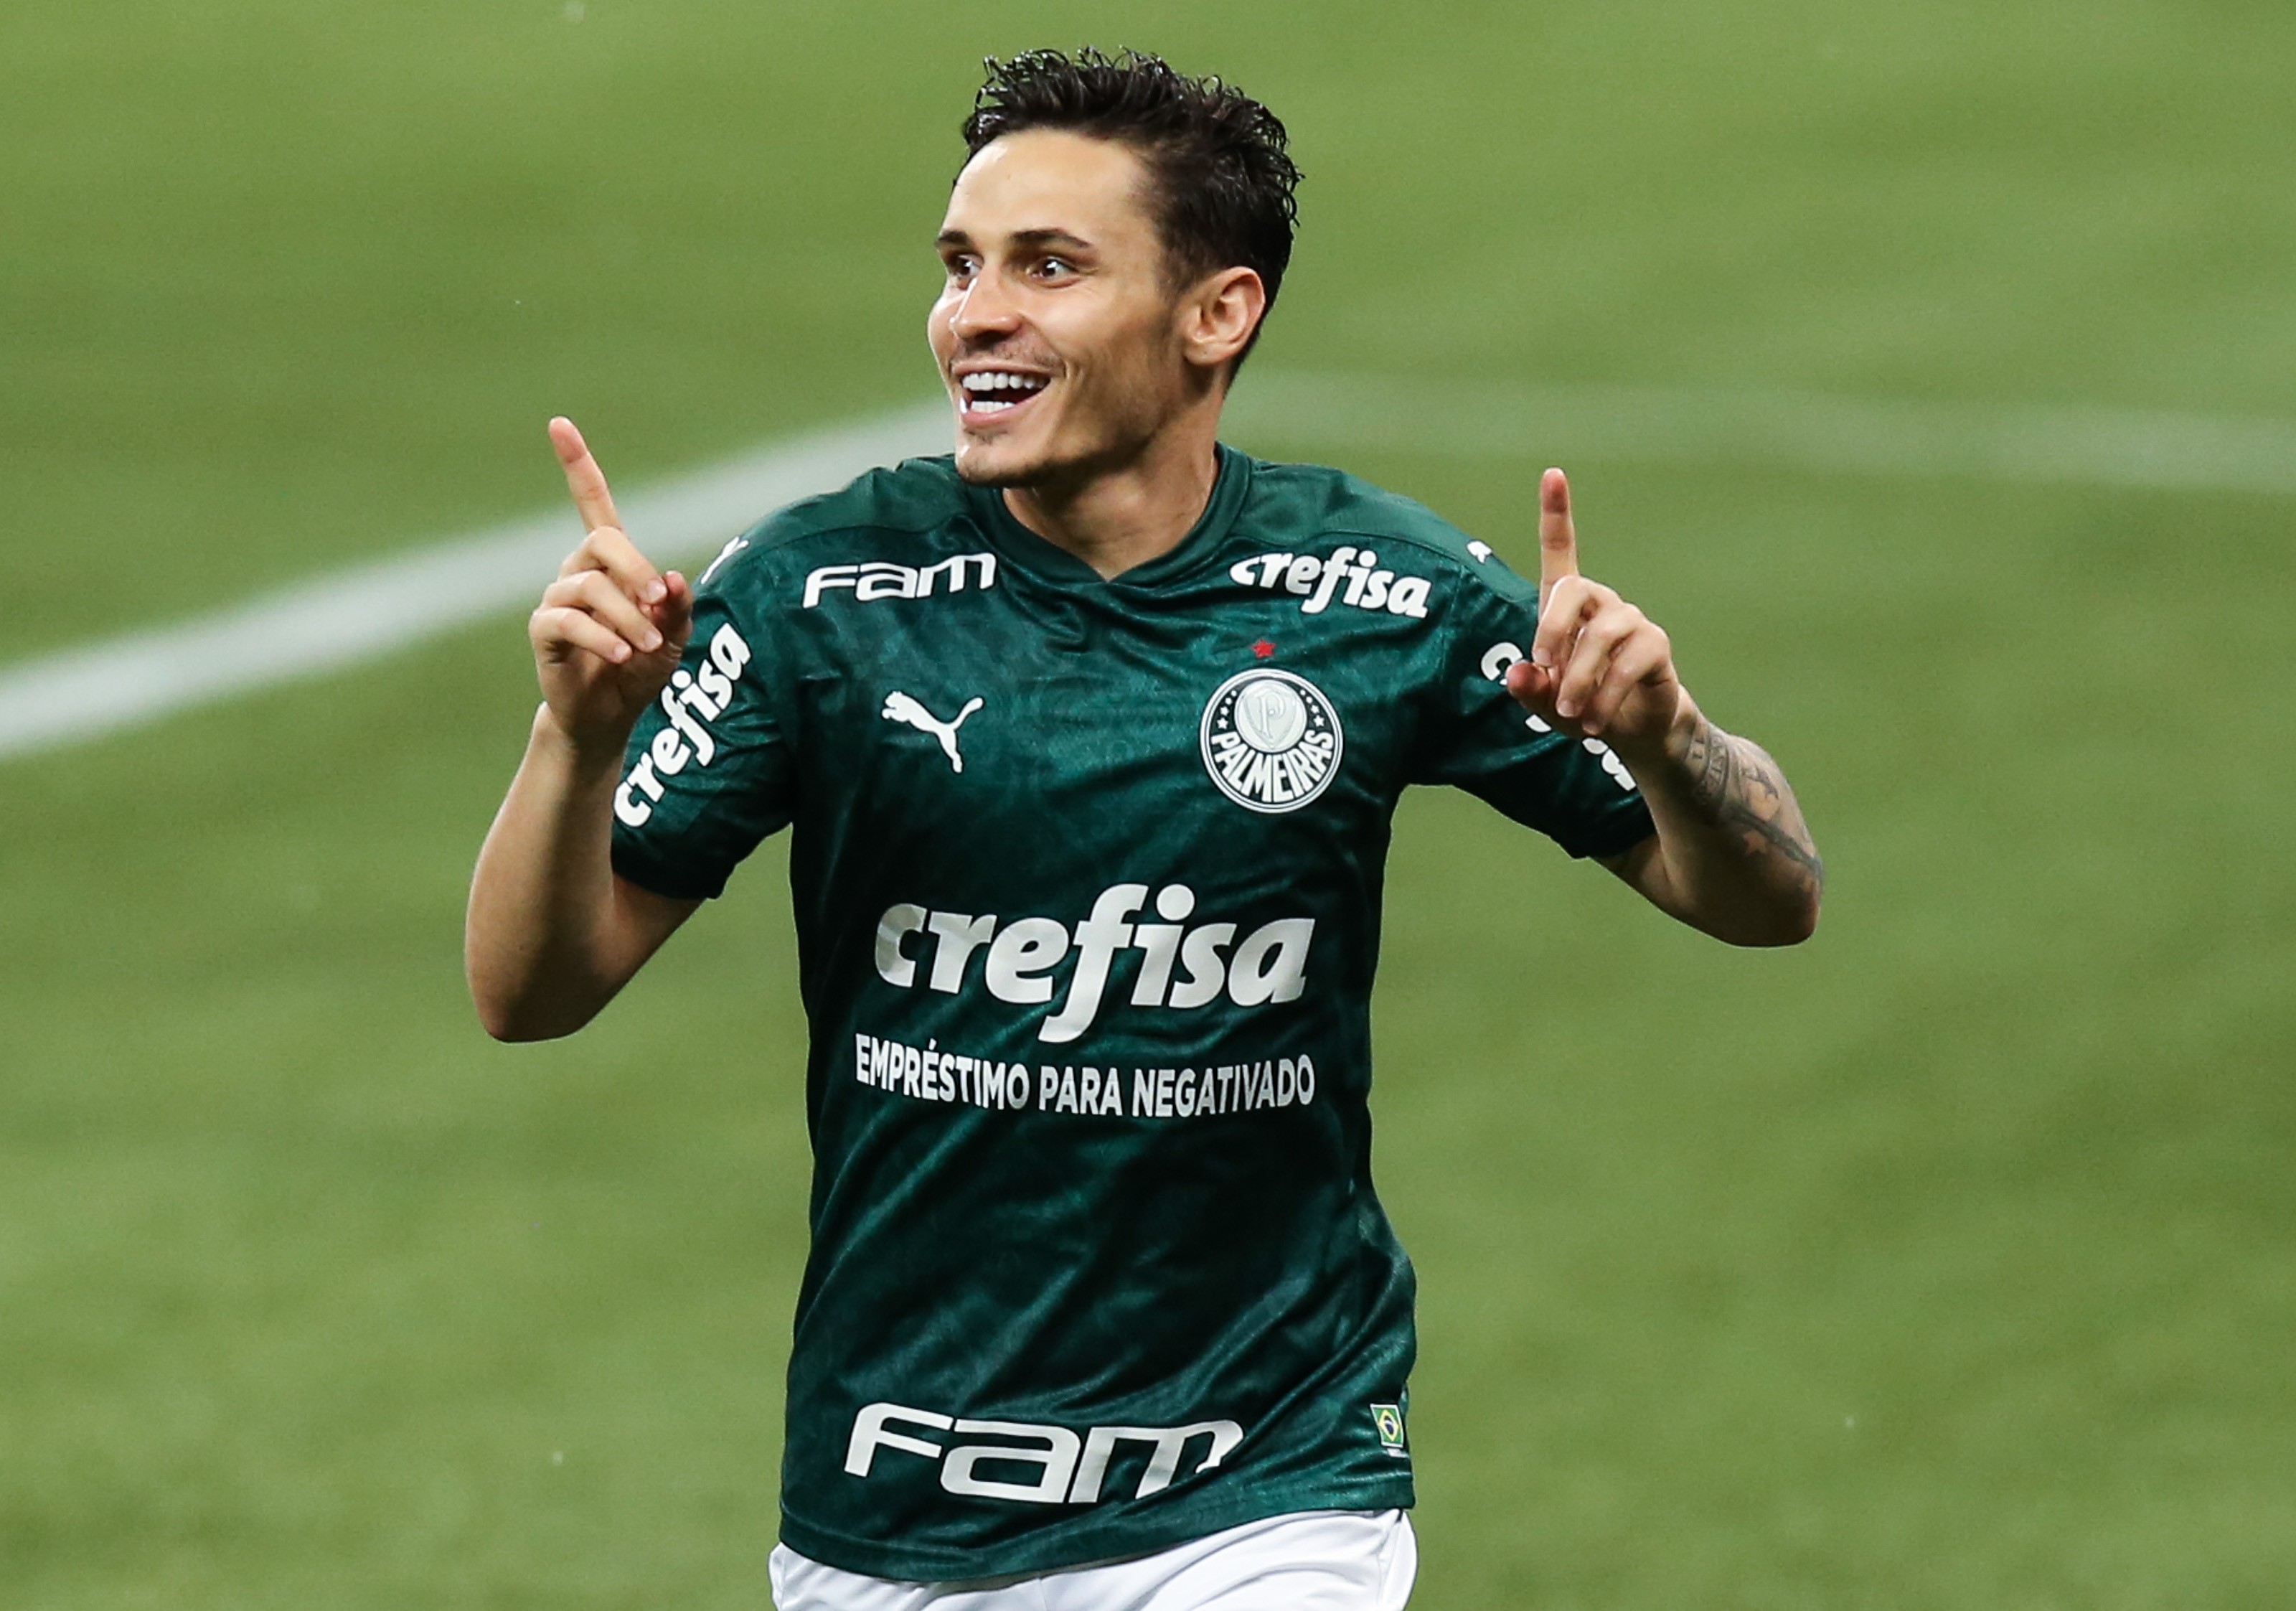 SAO PAULO, BRAZIL - JANUARY 18: Raphael Veiga #23 of Palmeiras celebrates after scoring the third goal of his team during the match against Corinthians as part of Brasileirao Series A 2020 at Allianz Parque on January 18, 2021 in Sao Paulo, Brazil. (Photo (Foto: Getty Images)